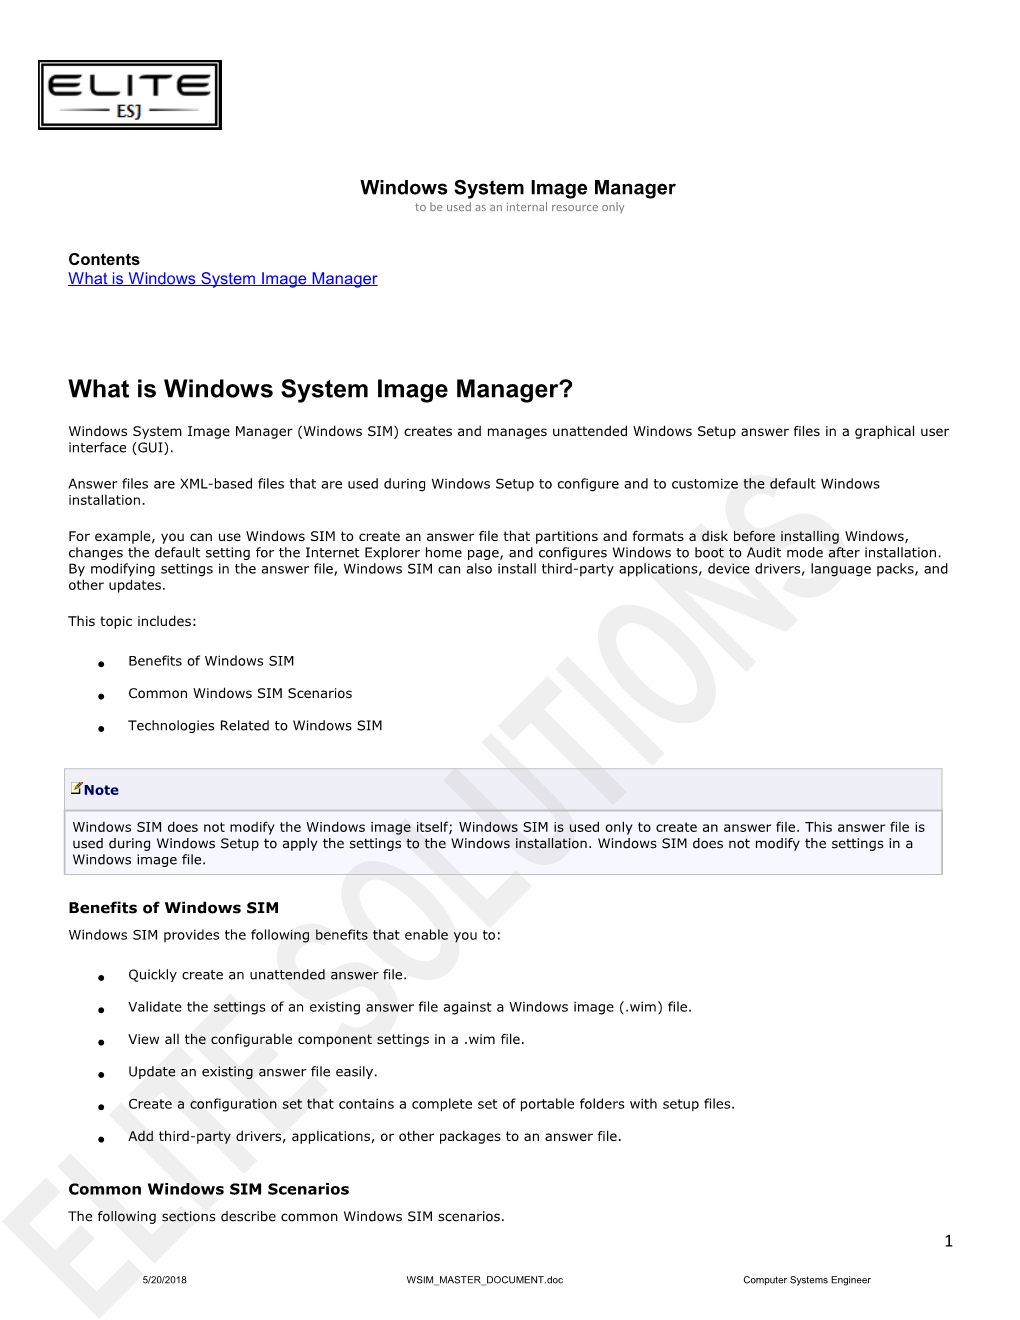 Contents What Is Windows System Image Manager What Is Windows System Image Manager?